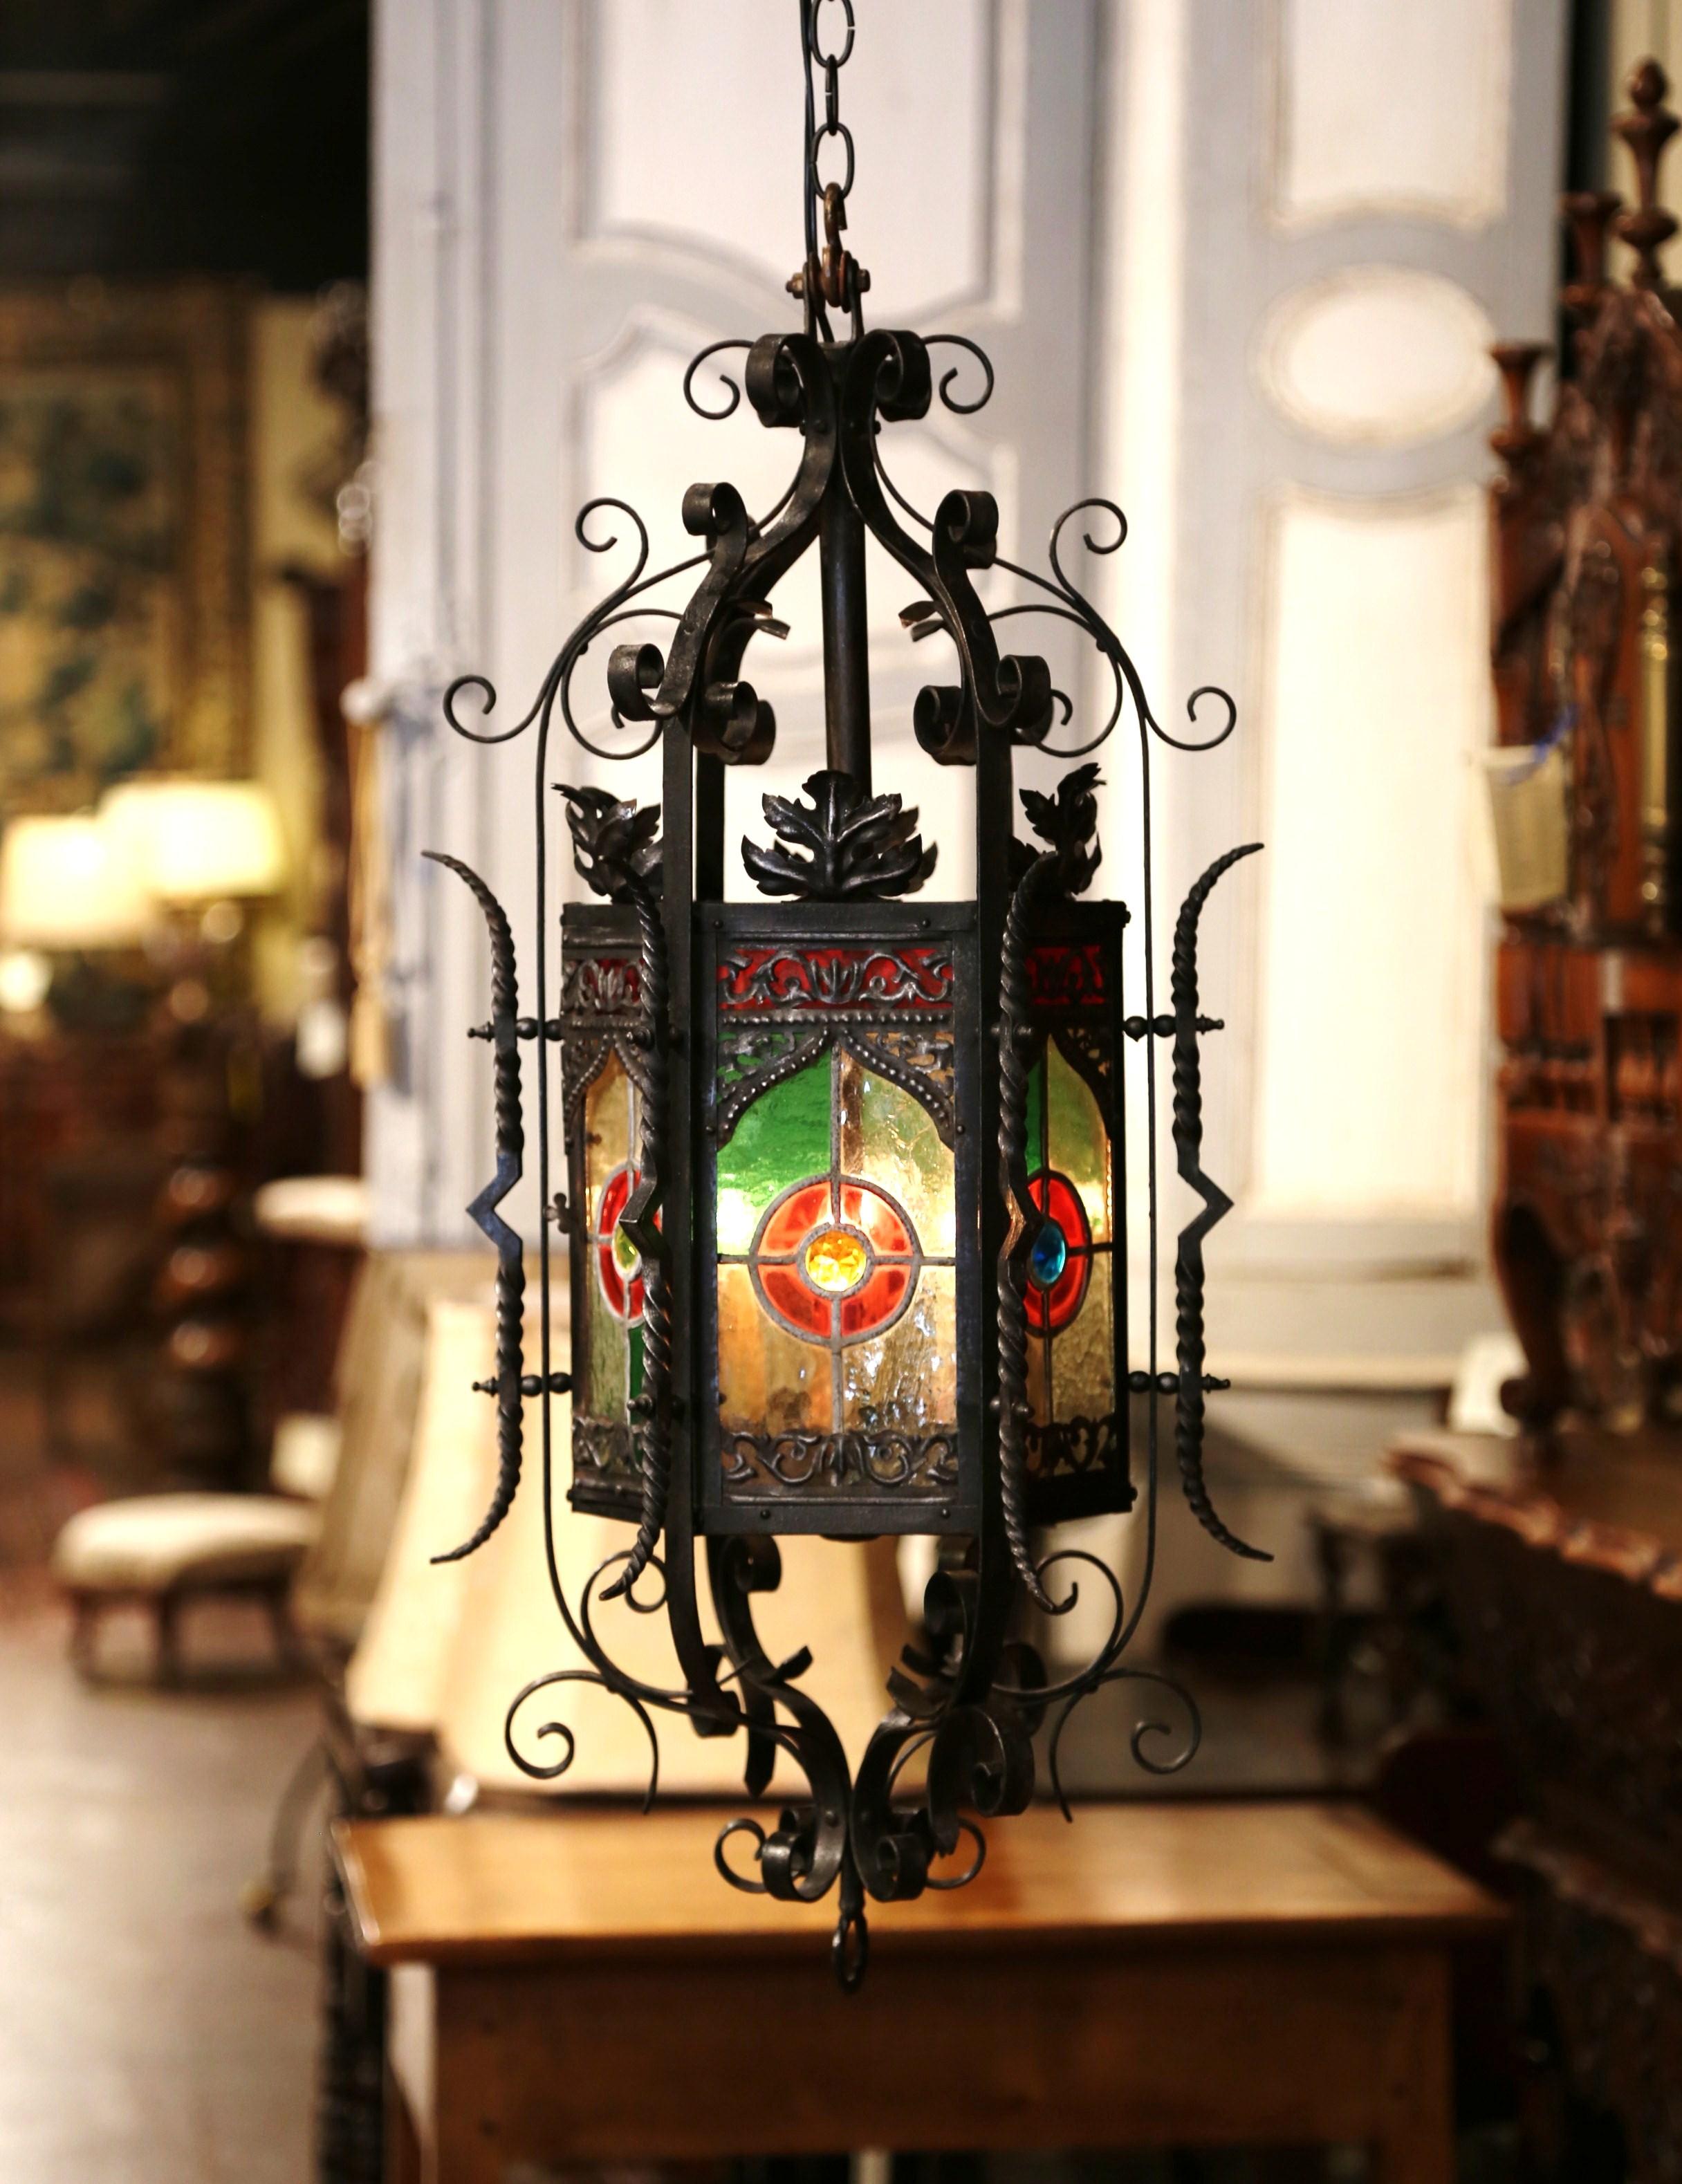 Decorate your entry or powder room with this elegant, Gothic hexagonal lantern. Crafted in France, circa 1870, the fixture has four inside lights, which were newly wired. The antique light fixture has six hand-painted, stained glass panels on each